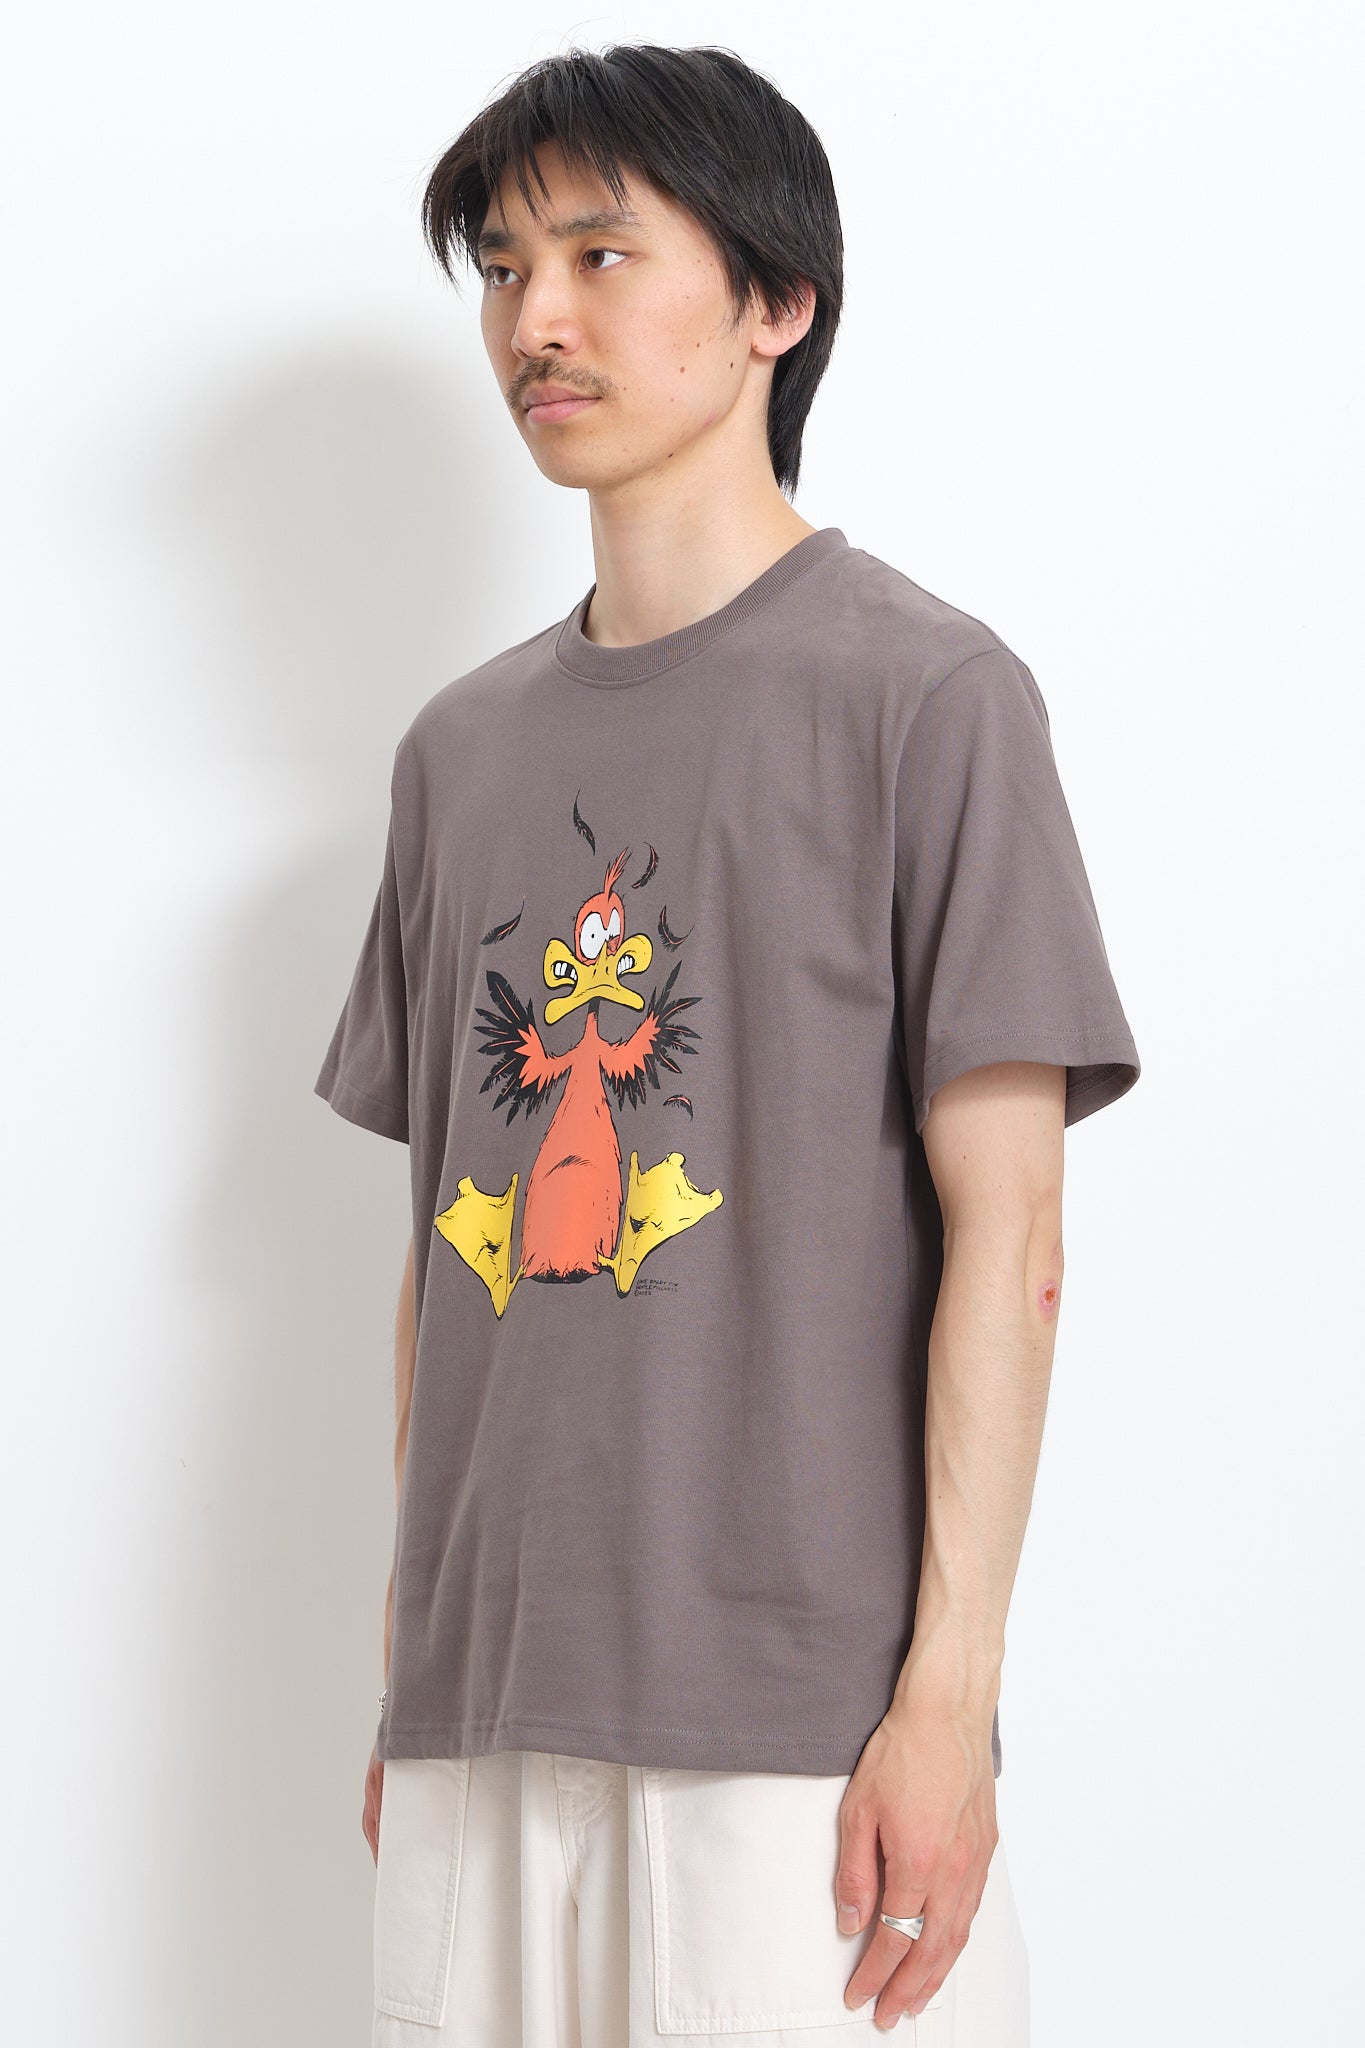 Recycled Cotton SS Tee - Washed Black Duckman